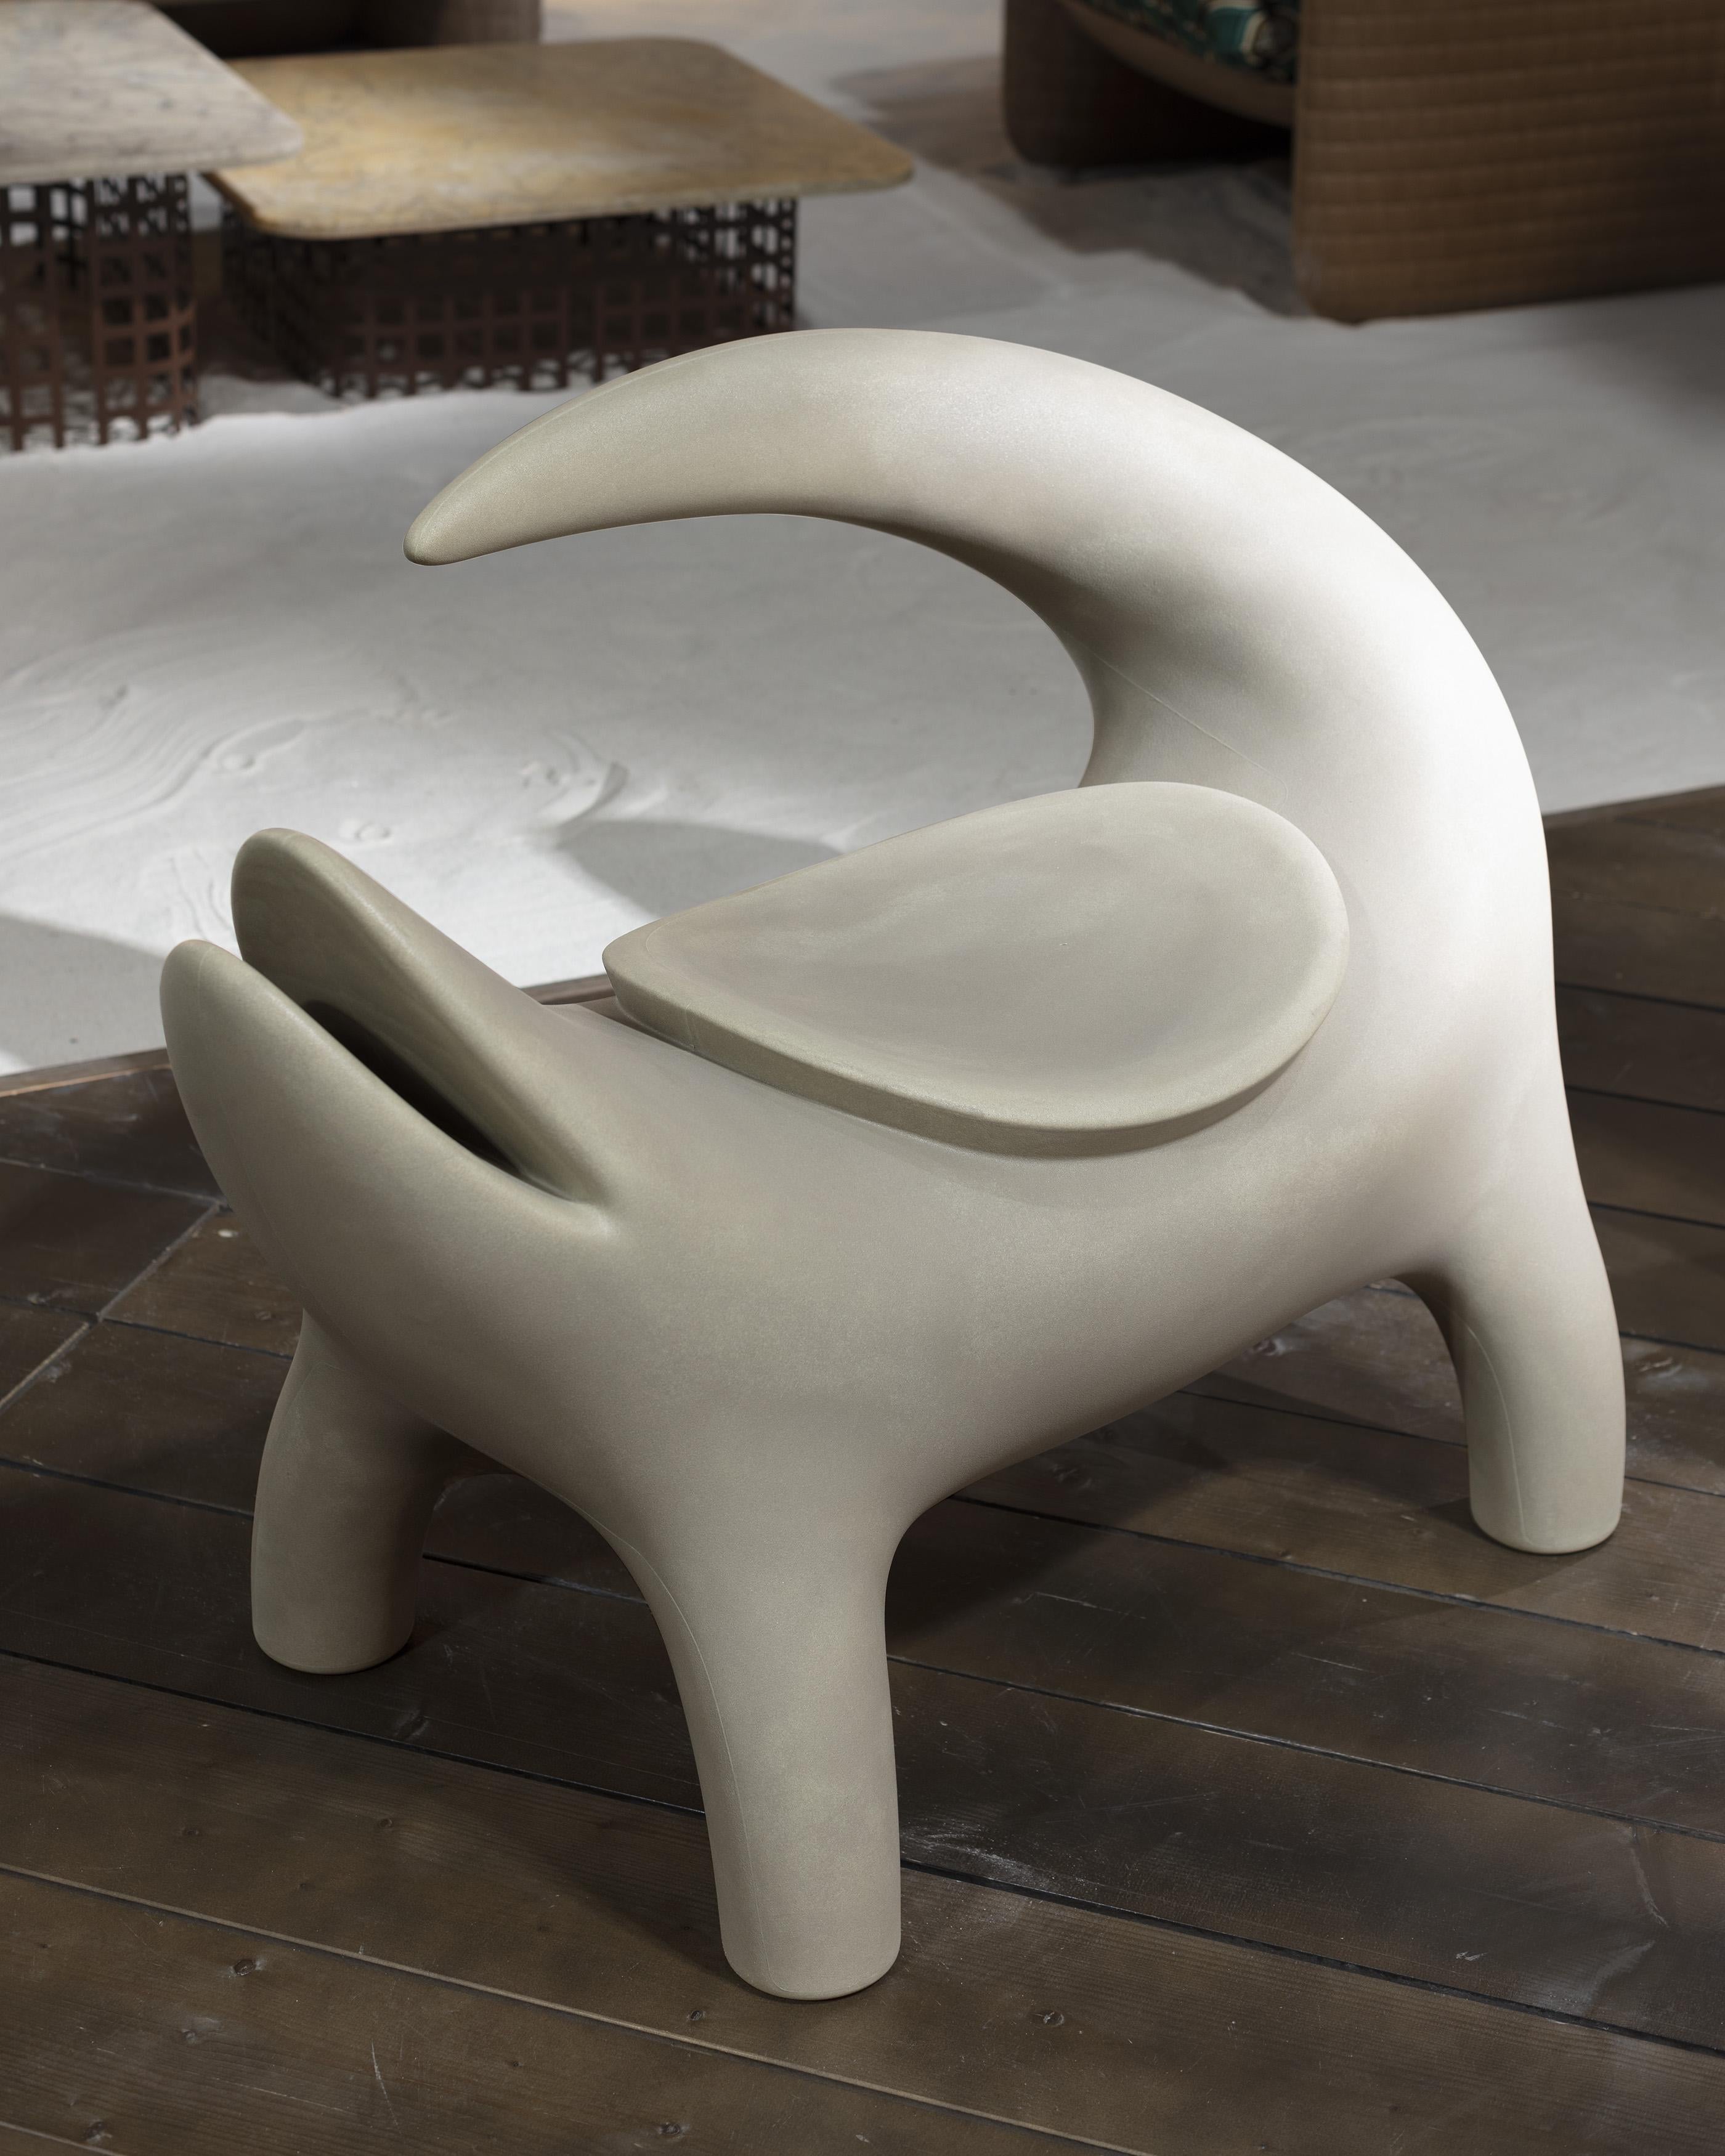 Namibian Desert Kroko Armchair by Marcantonio
Dimensions: D 60 x W 110 x H 74 cm. Seat Height: 43 cm.
Materials: Polyethylene.
Weight: 11 kg.

Also available in biobased polyethylene of vegetal origin, obtained from
sugar cane. Available in